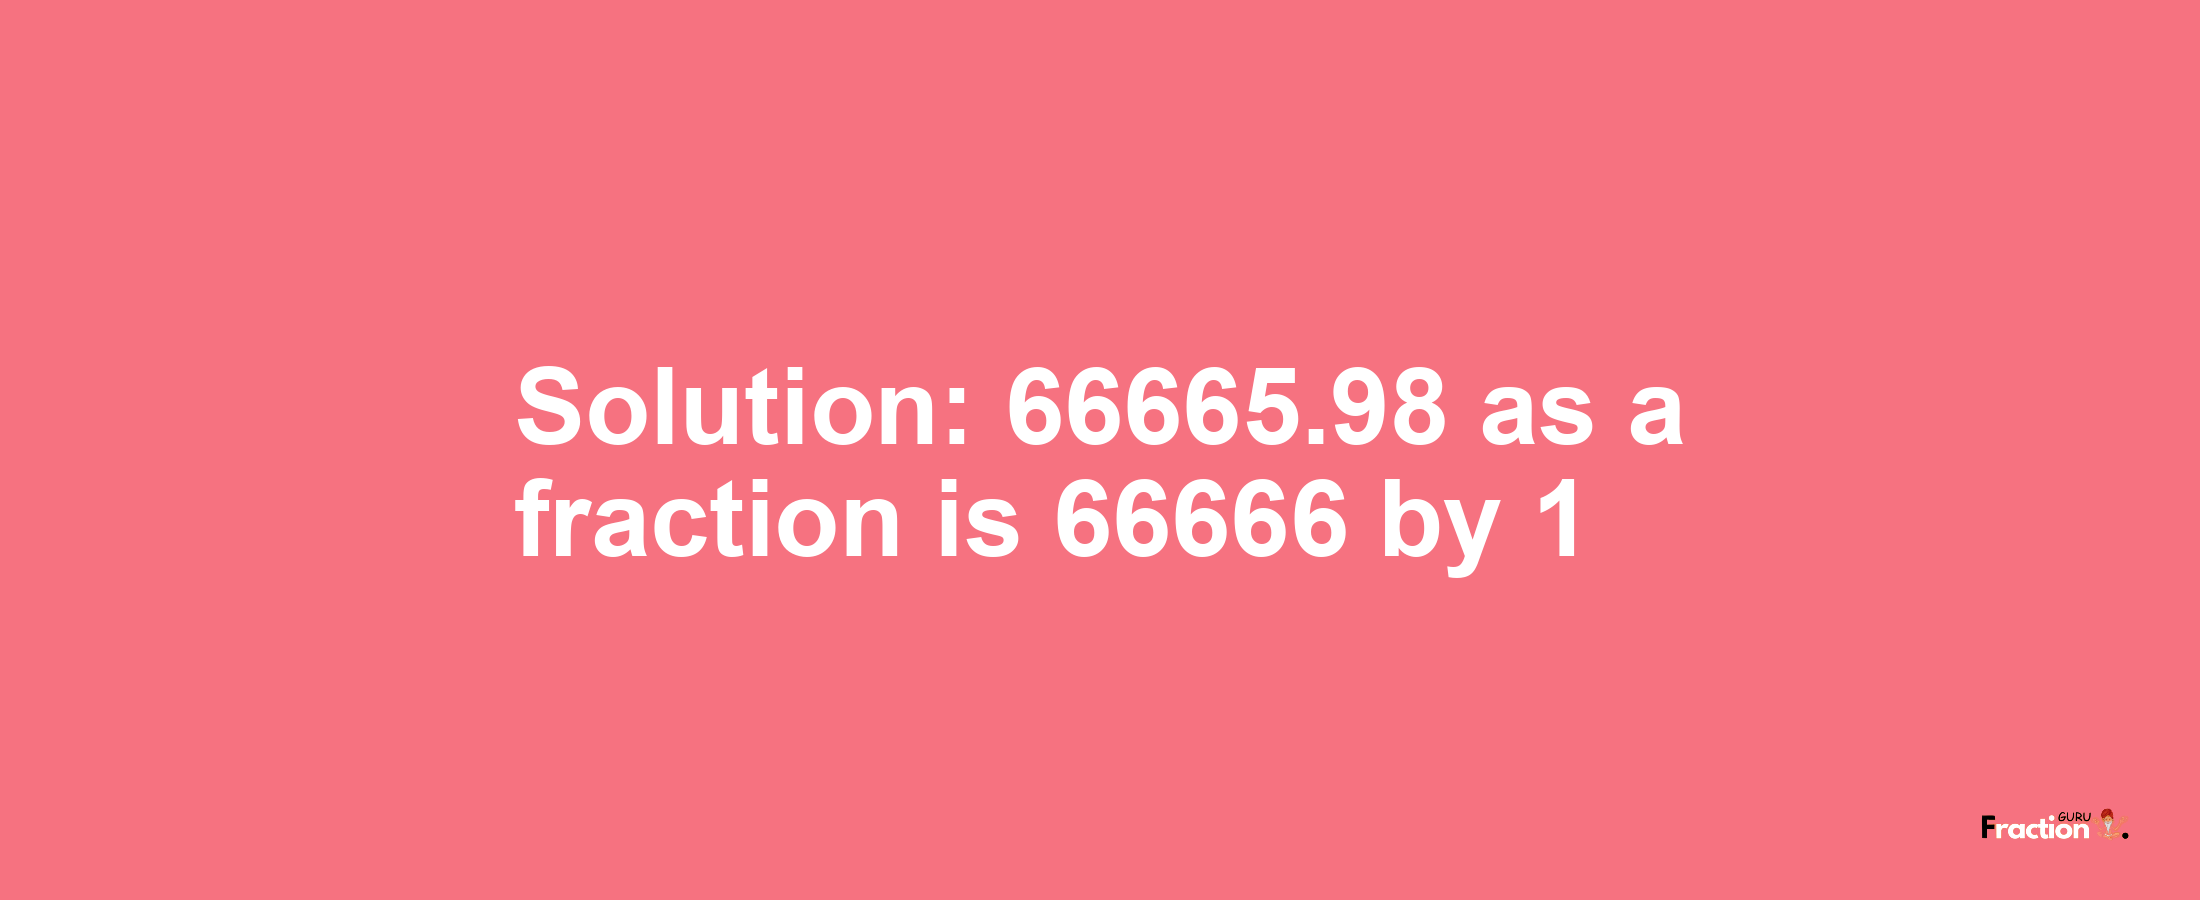 Solution:66665.98 as a fraction is 66666/1